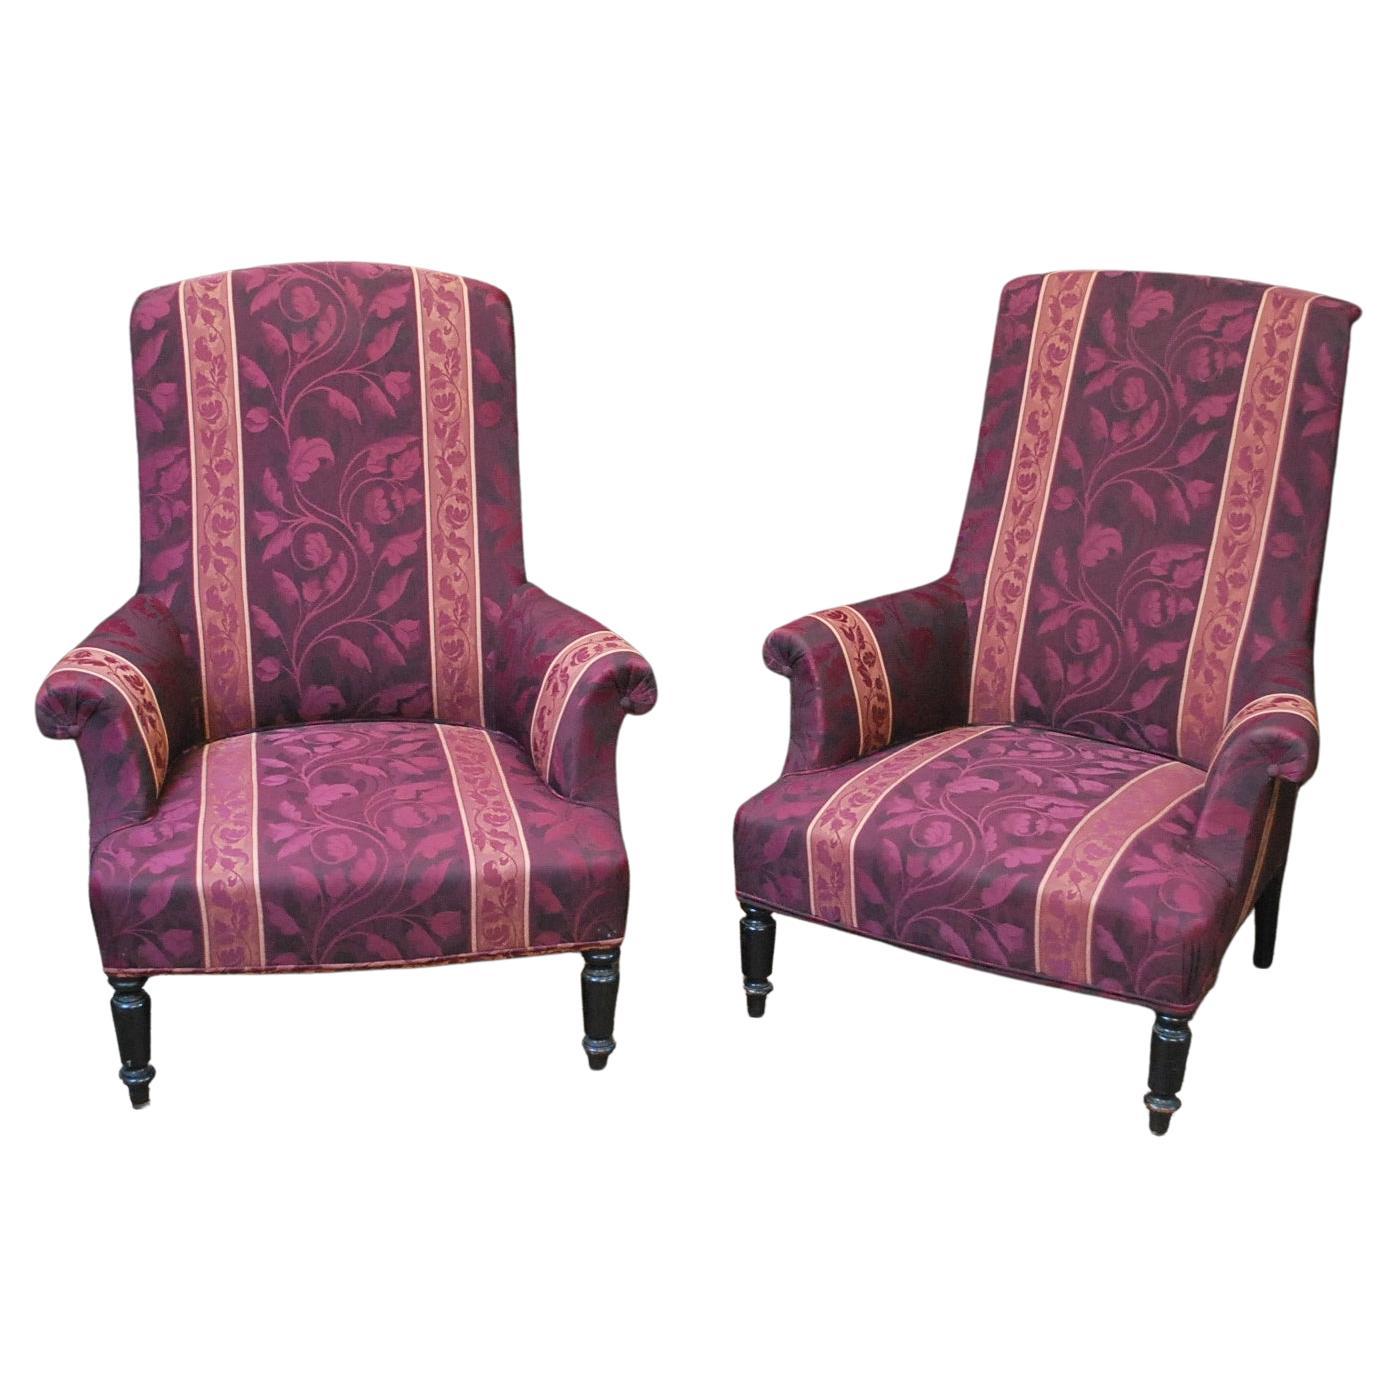 Pair of armchairs /Fauteuils